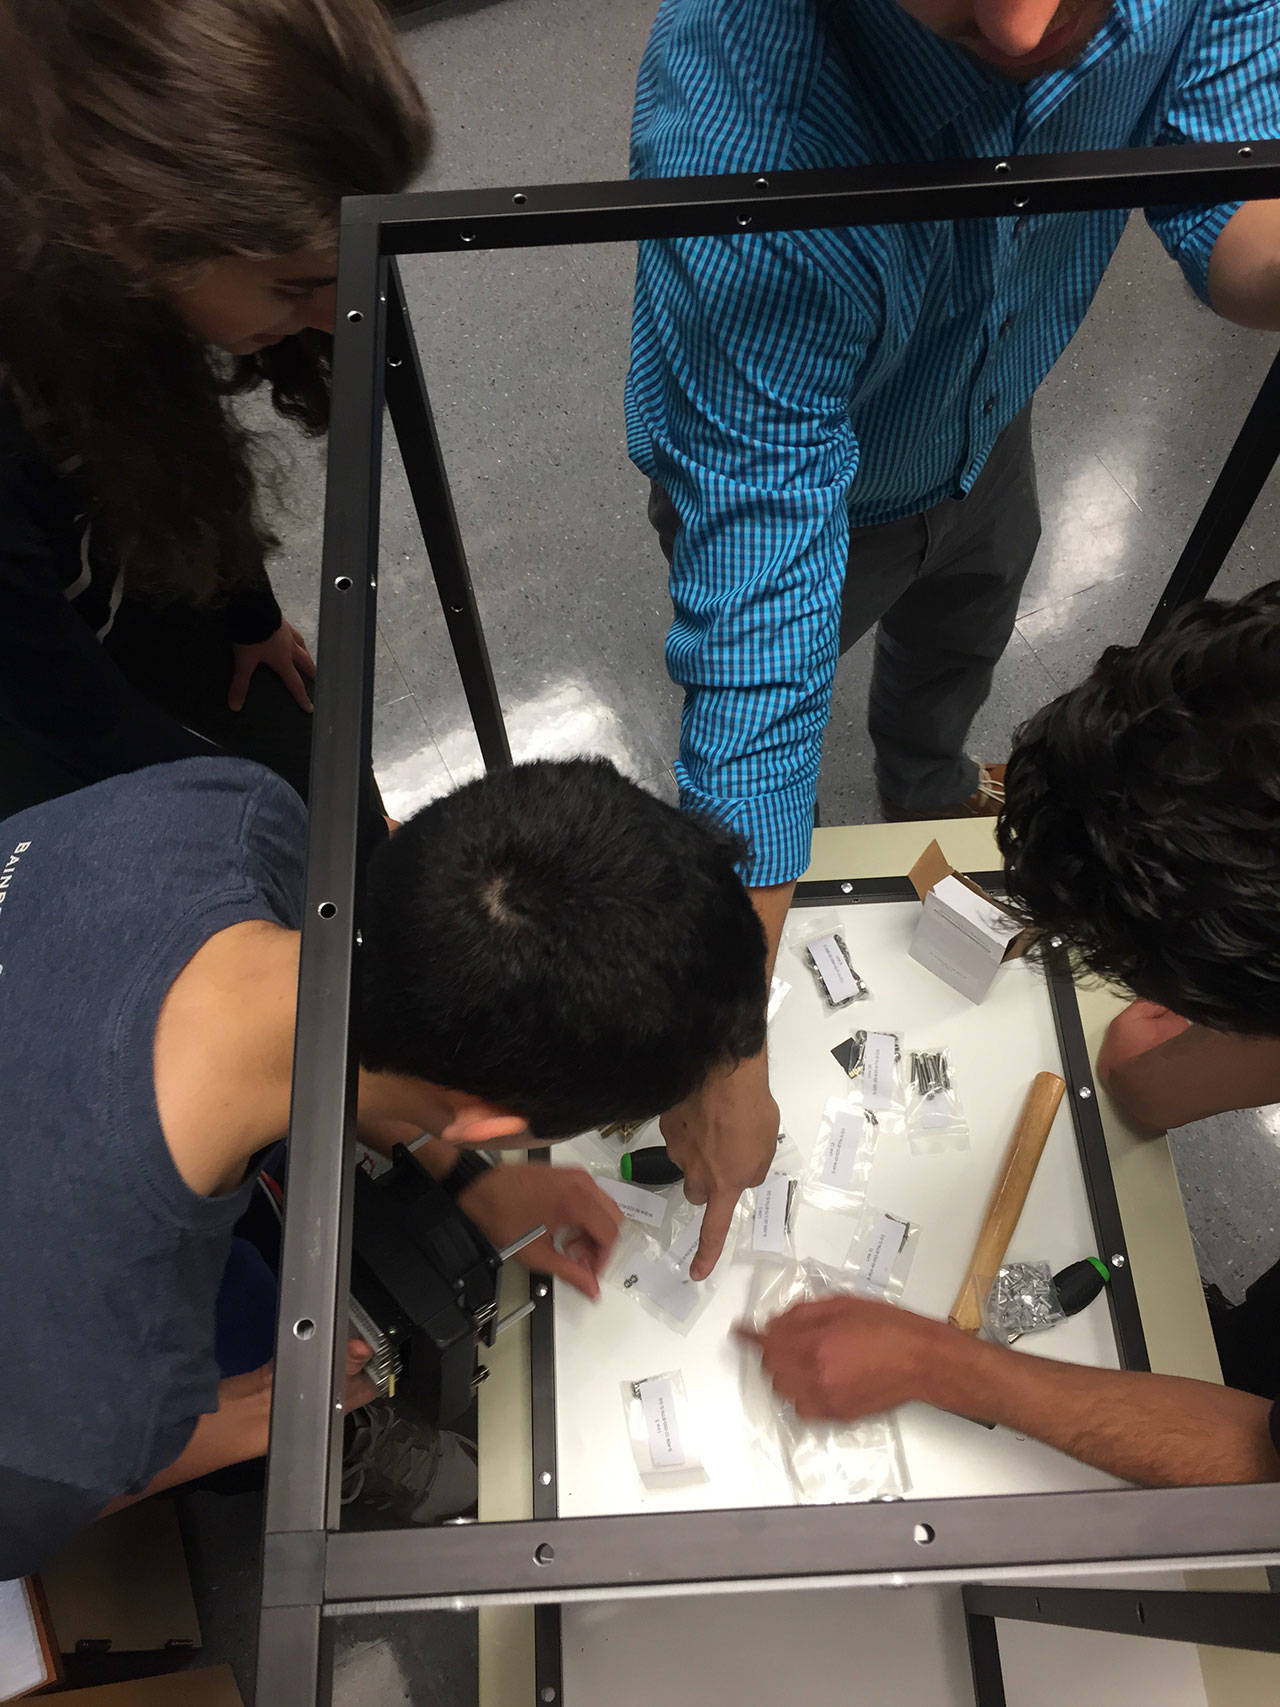 Students at BHS construct food computers with MIT